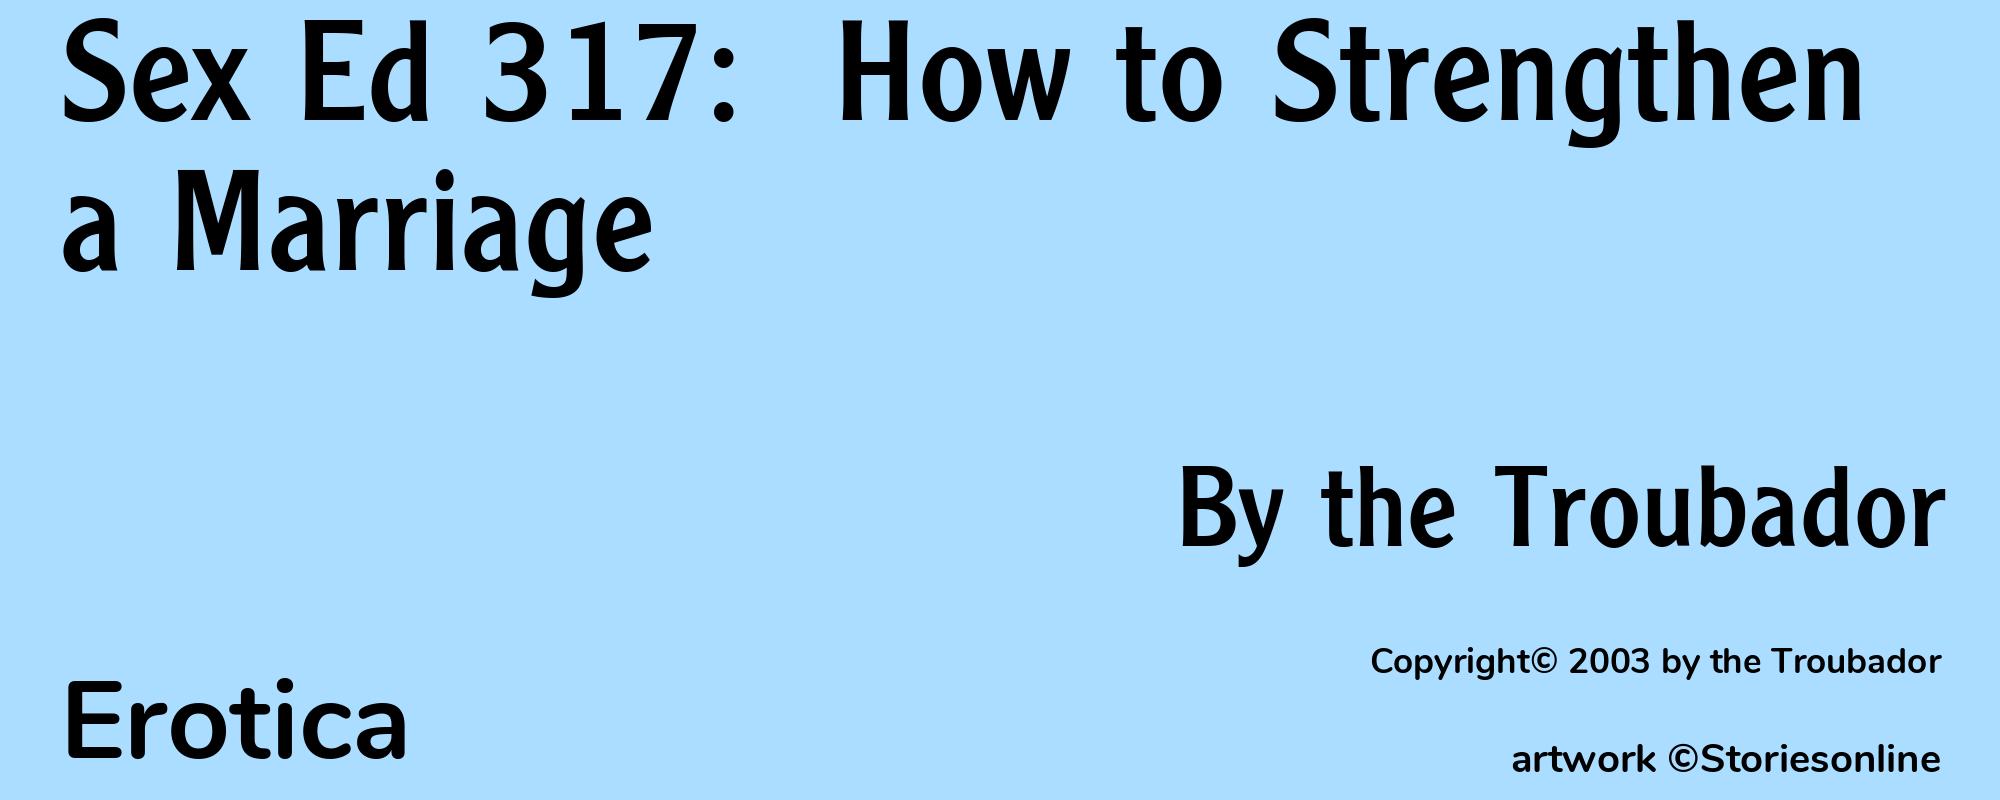 Sex Ed 317:  How to Strengthen a Marriage - Cover